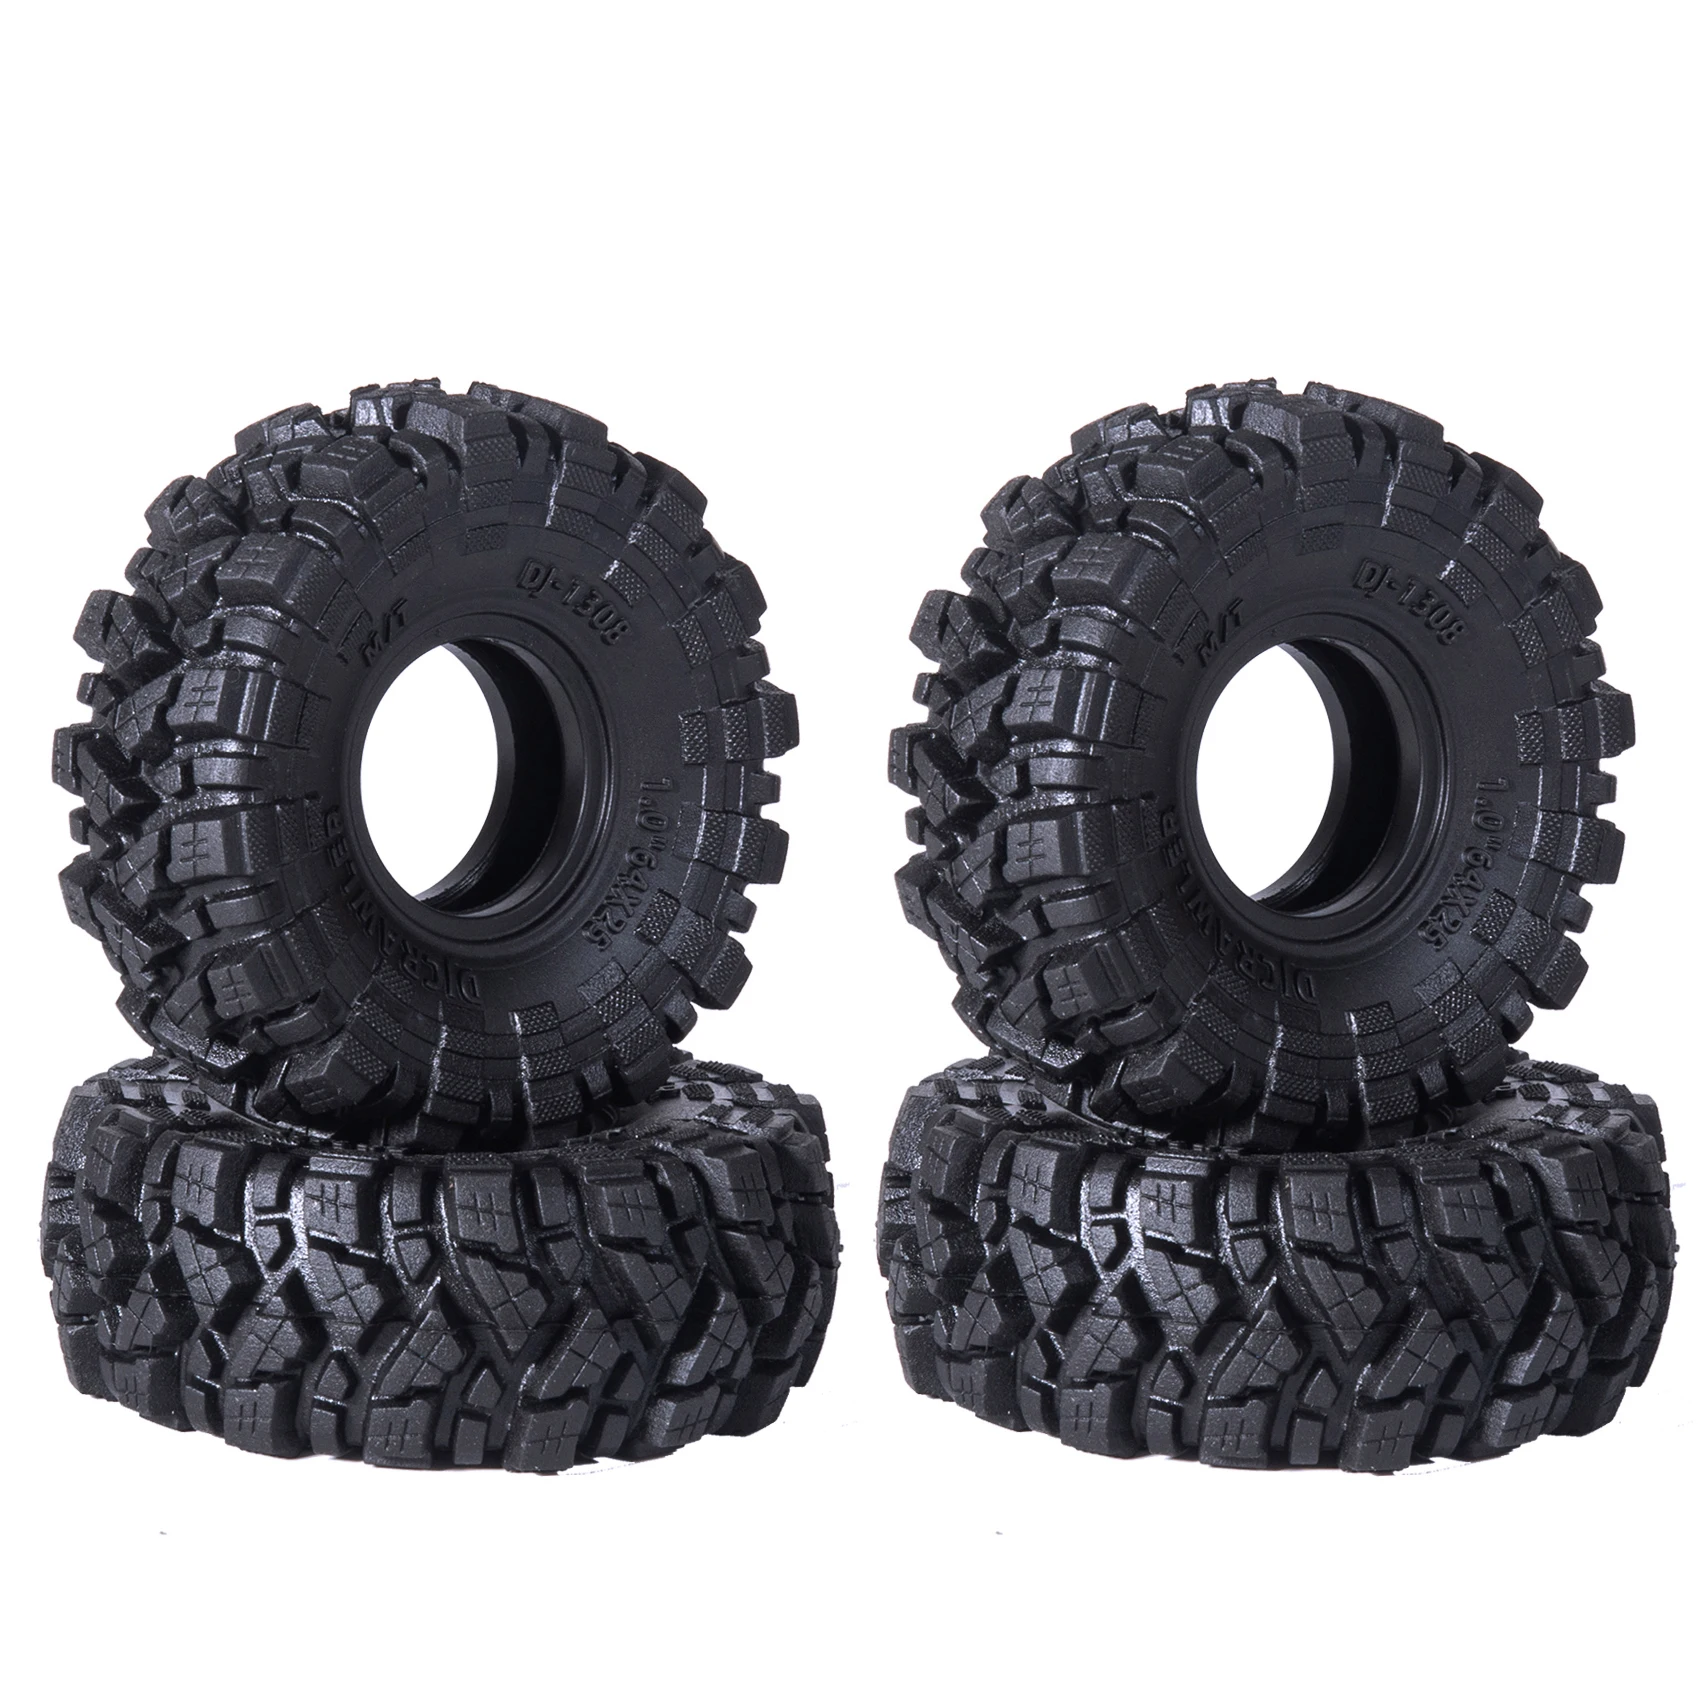 

1 Inch Enlarge And Widen Super Soft Tires 64x25mm 1/24 Rc Crawler Truck Car Parts For Axial Scx24 Fms Fms24 1/18 Trax/as Trx4m